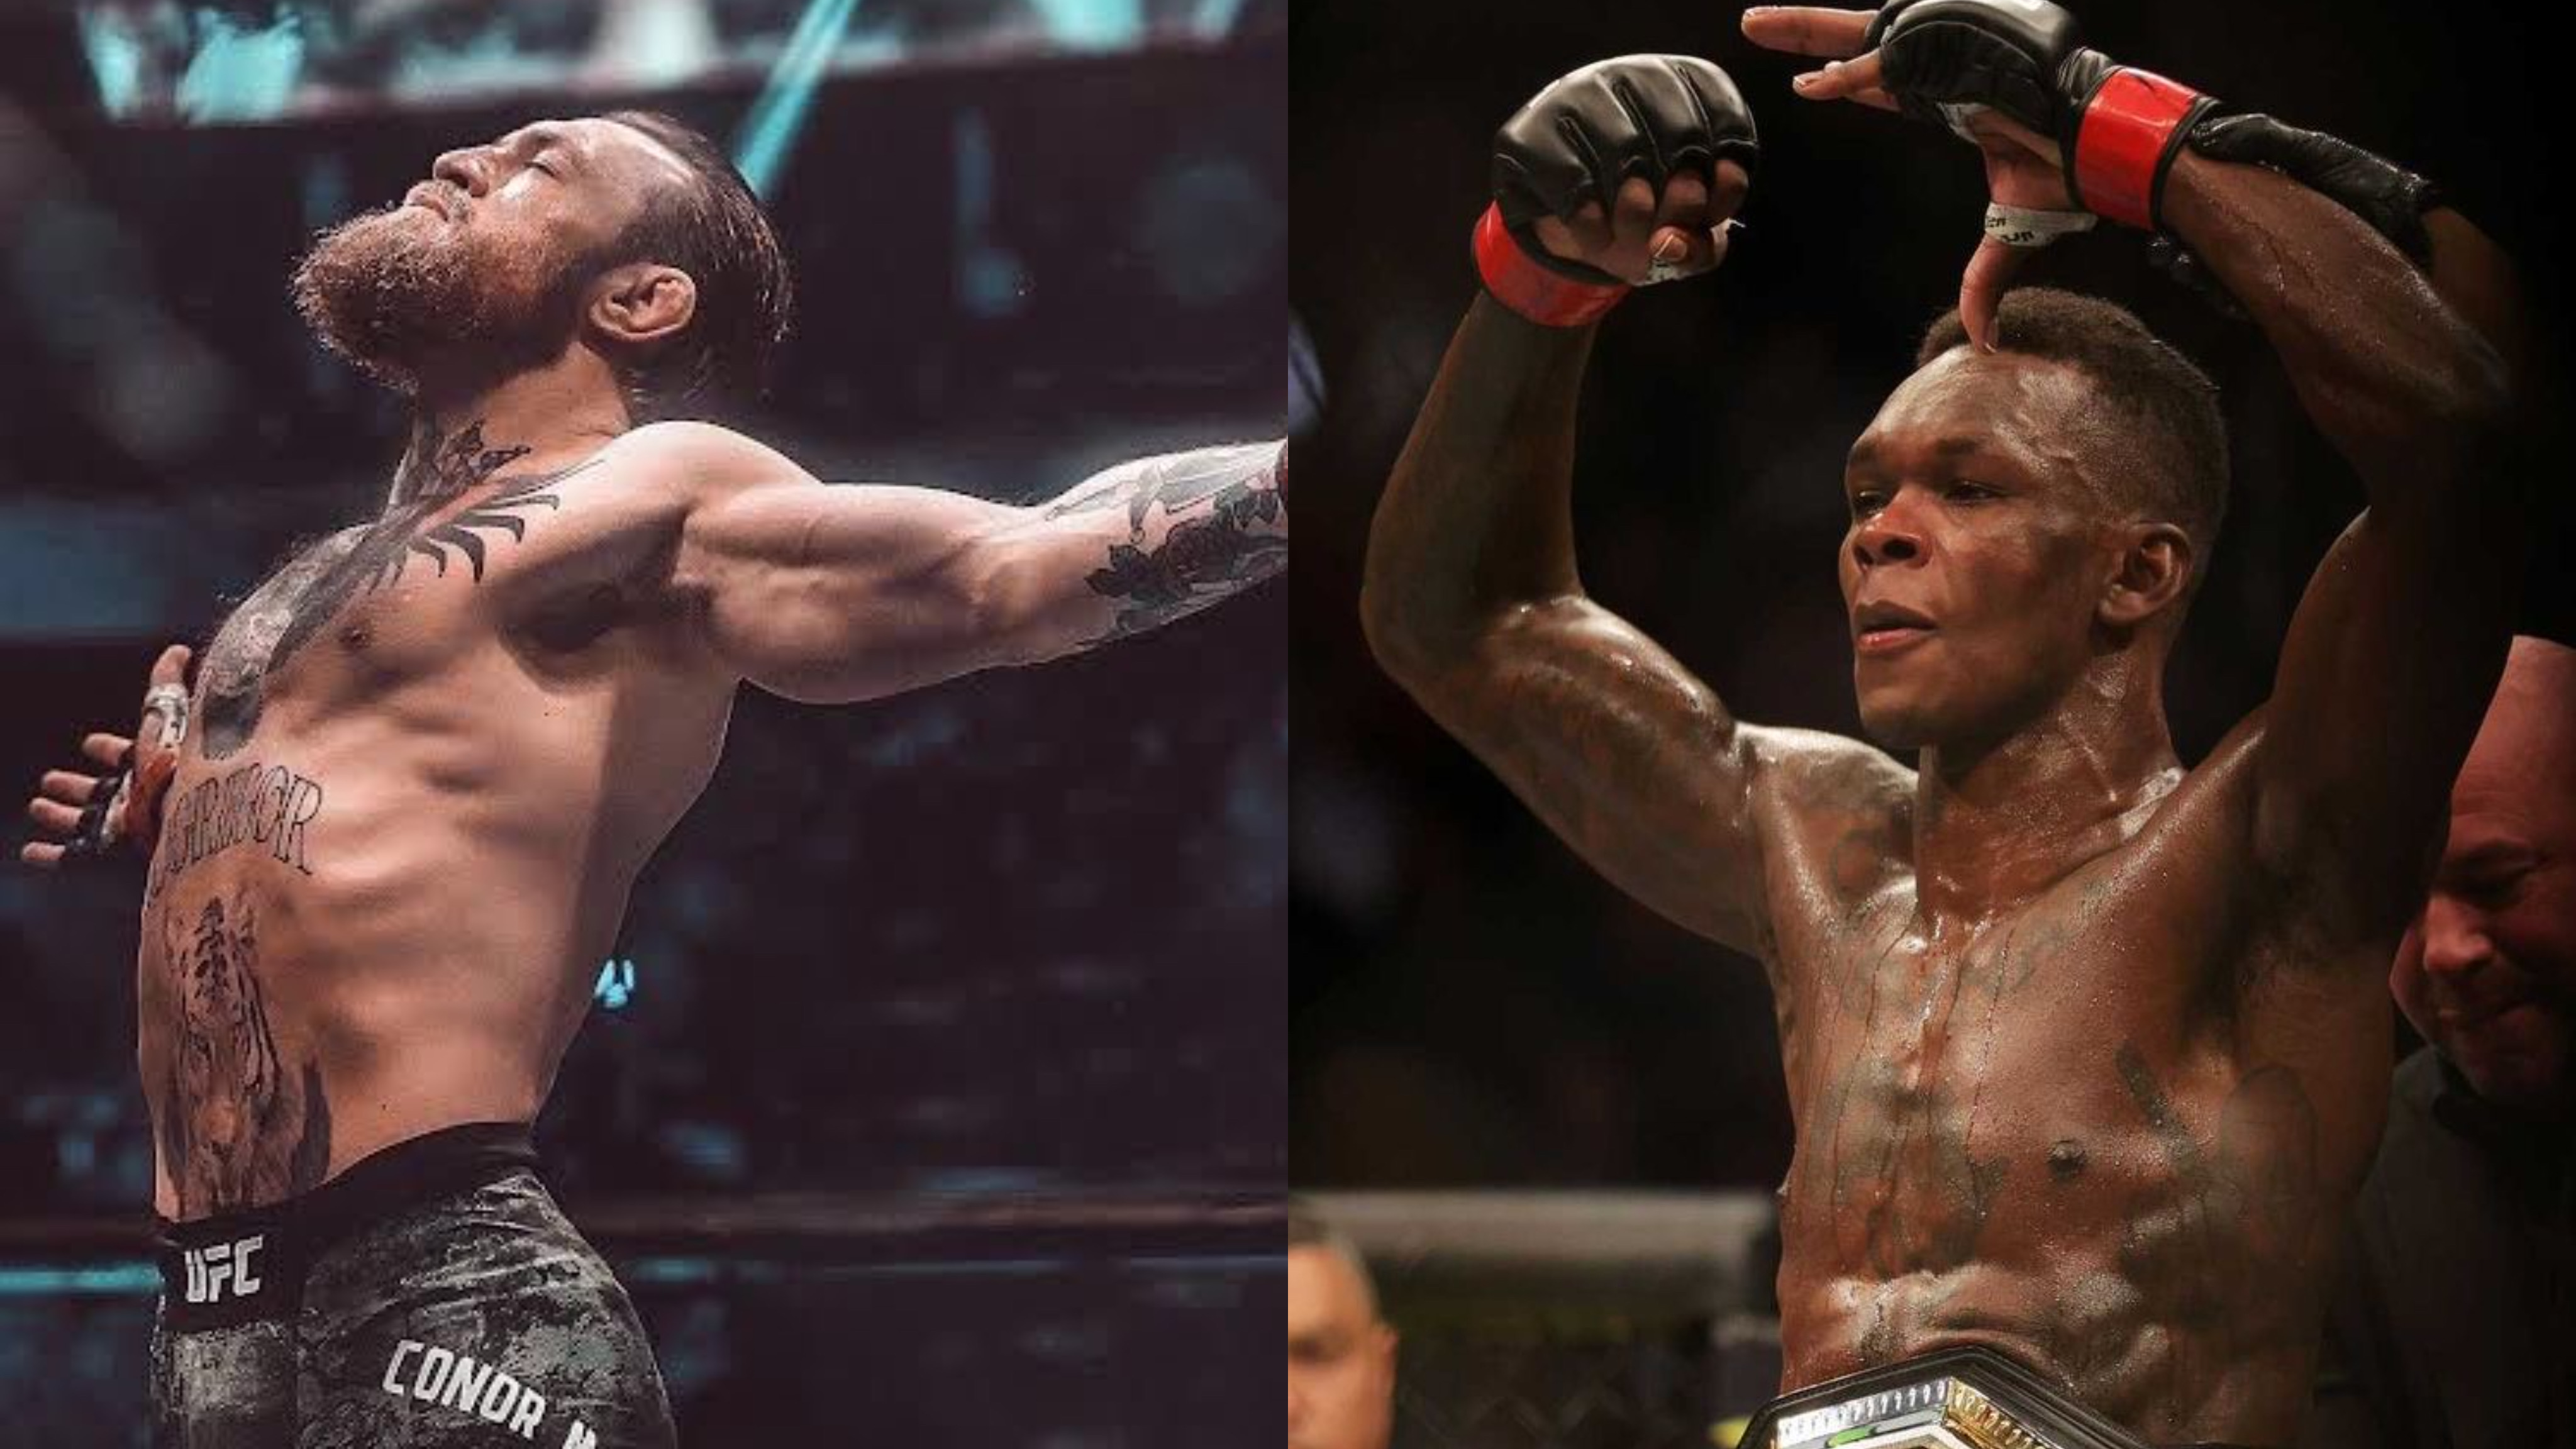 Dana White Snubs Conor McGregor For Israel Adesanya, Khamzat Chimaev While Naming UFC Fighter Whom World Wants To See